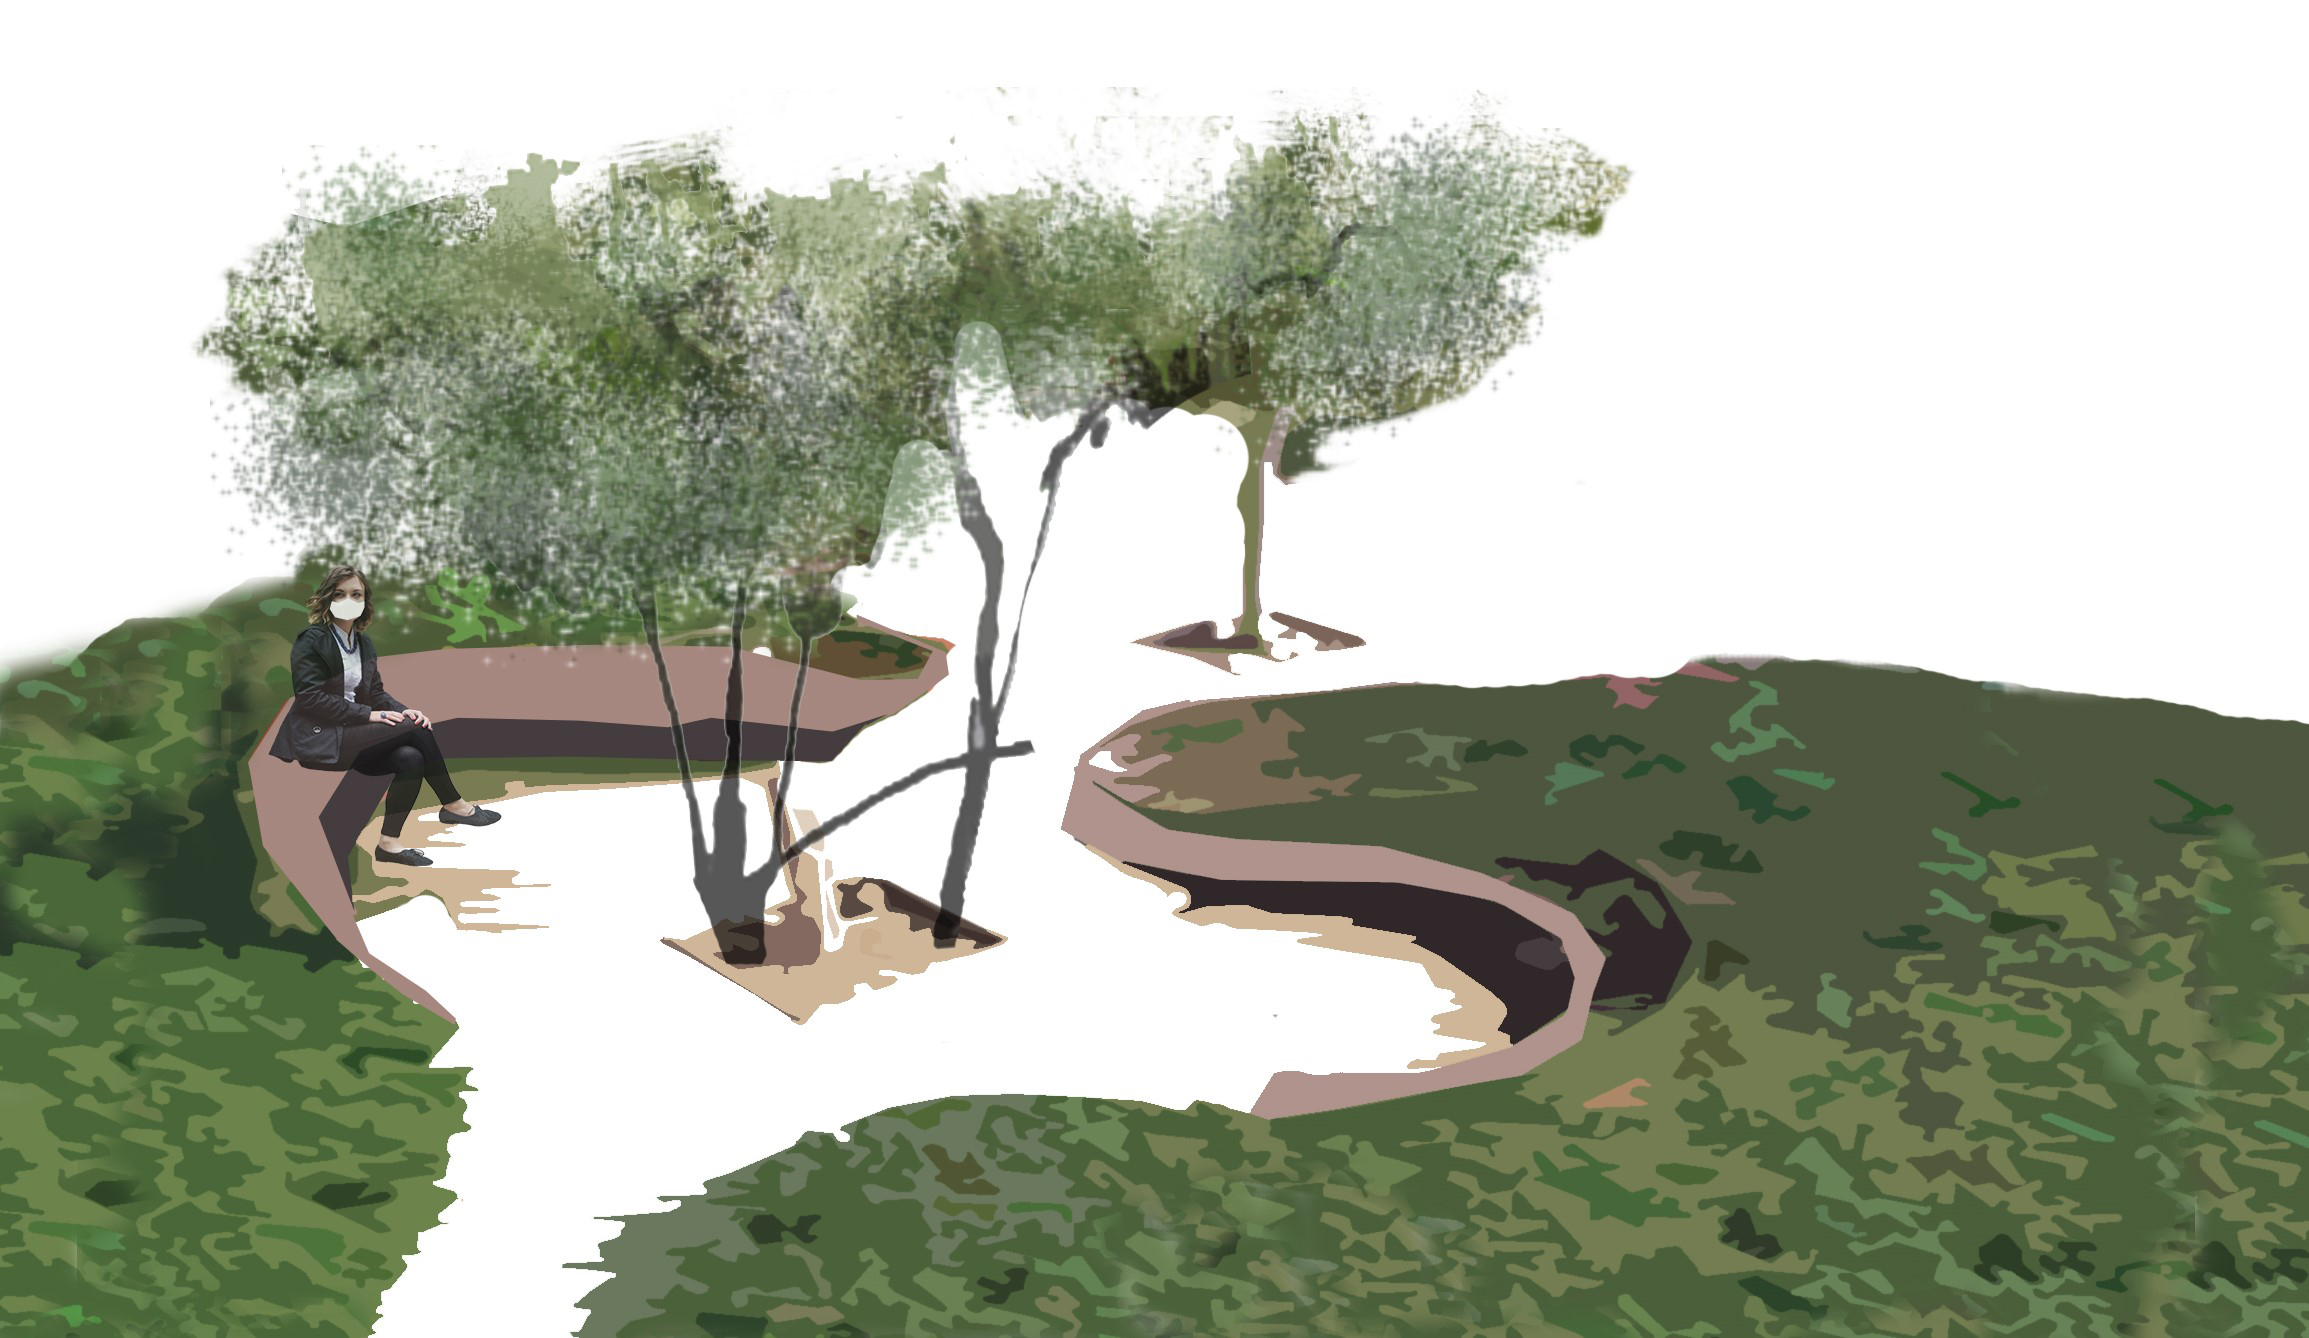 Landscape Strategies: The Gandhi Park in the Face of the COVID-19 Pandemic